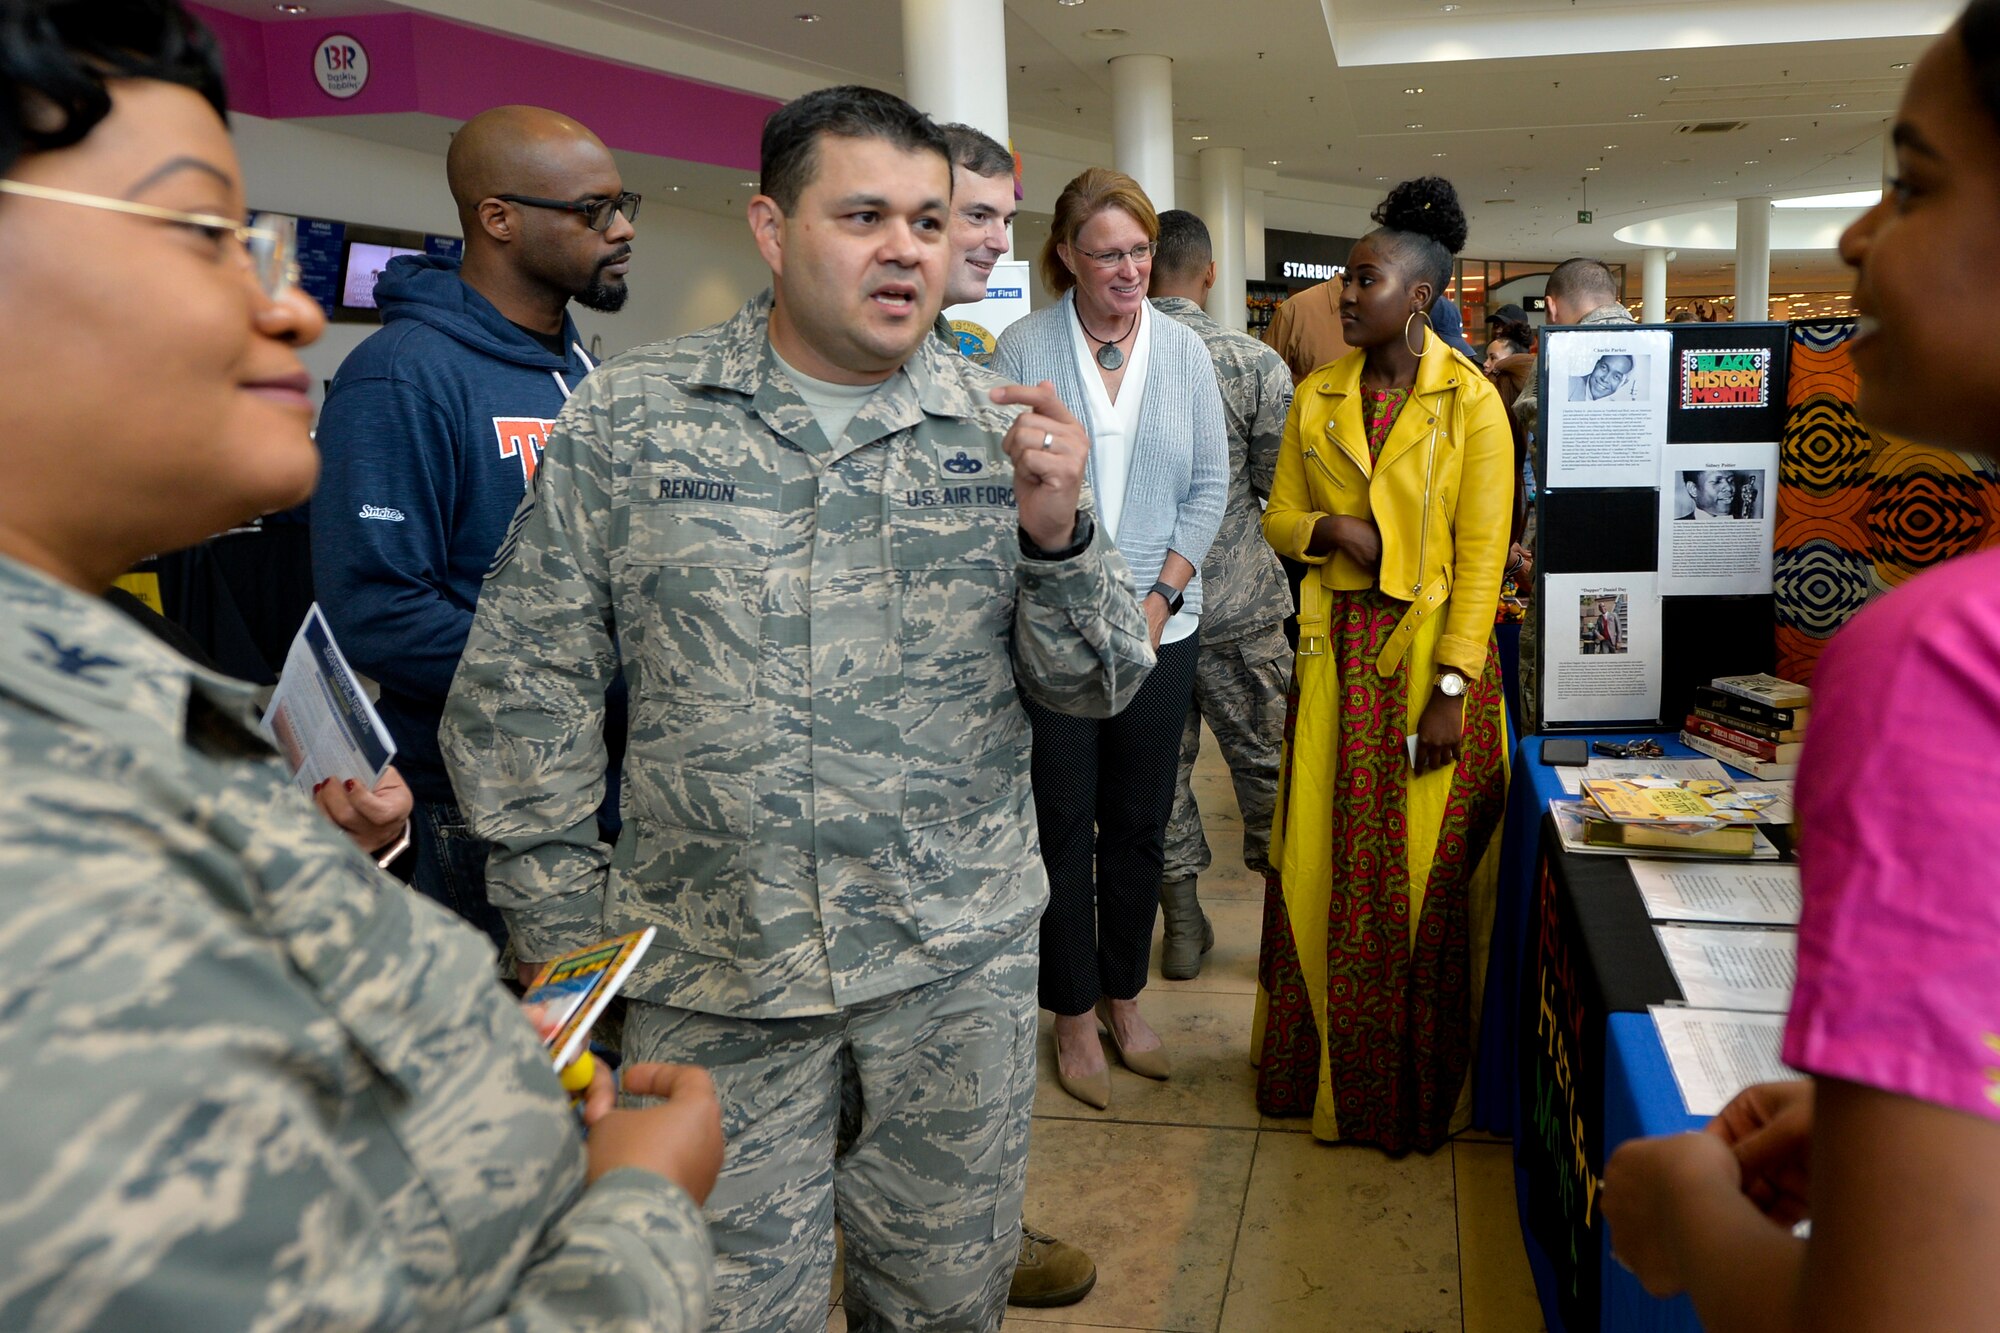 U.S. Air Force Chief Master Sgt. Ernesto J. Rendon Jr., 86th Airlift Wing command chief, center, speaks with Ramstein Air Base Airmen during the 86th Airlift Wing’s Diversity Day, Sept. 28. 2018. As the 86th AW’s newly appointed command chief, Rendon advises the commander and senior leadership on enlisted issues for the wing's 8,000 personnel.  (U.S. Air Force photo by Staff Sgt. Nesha Humes Stanton)